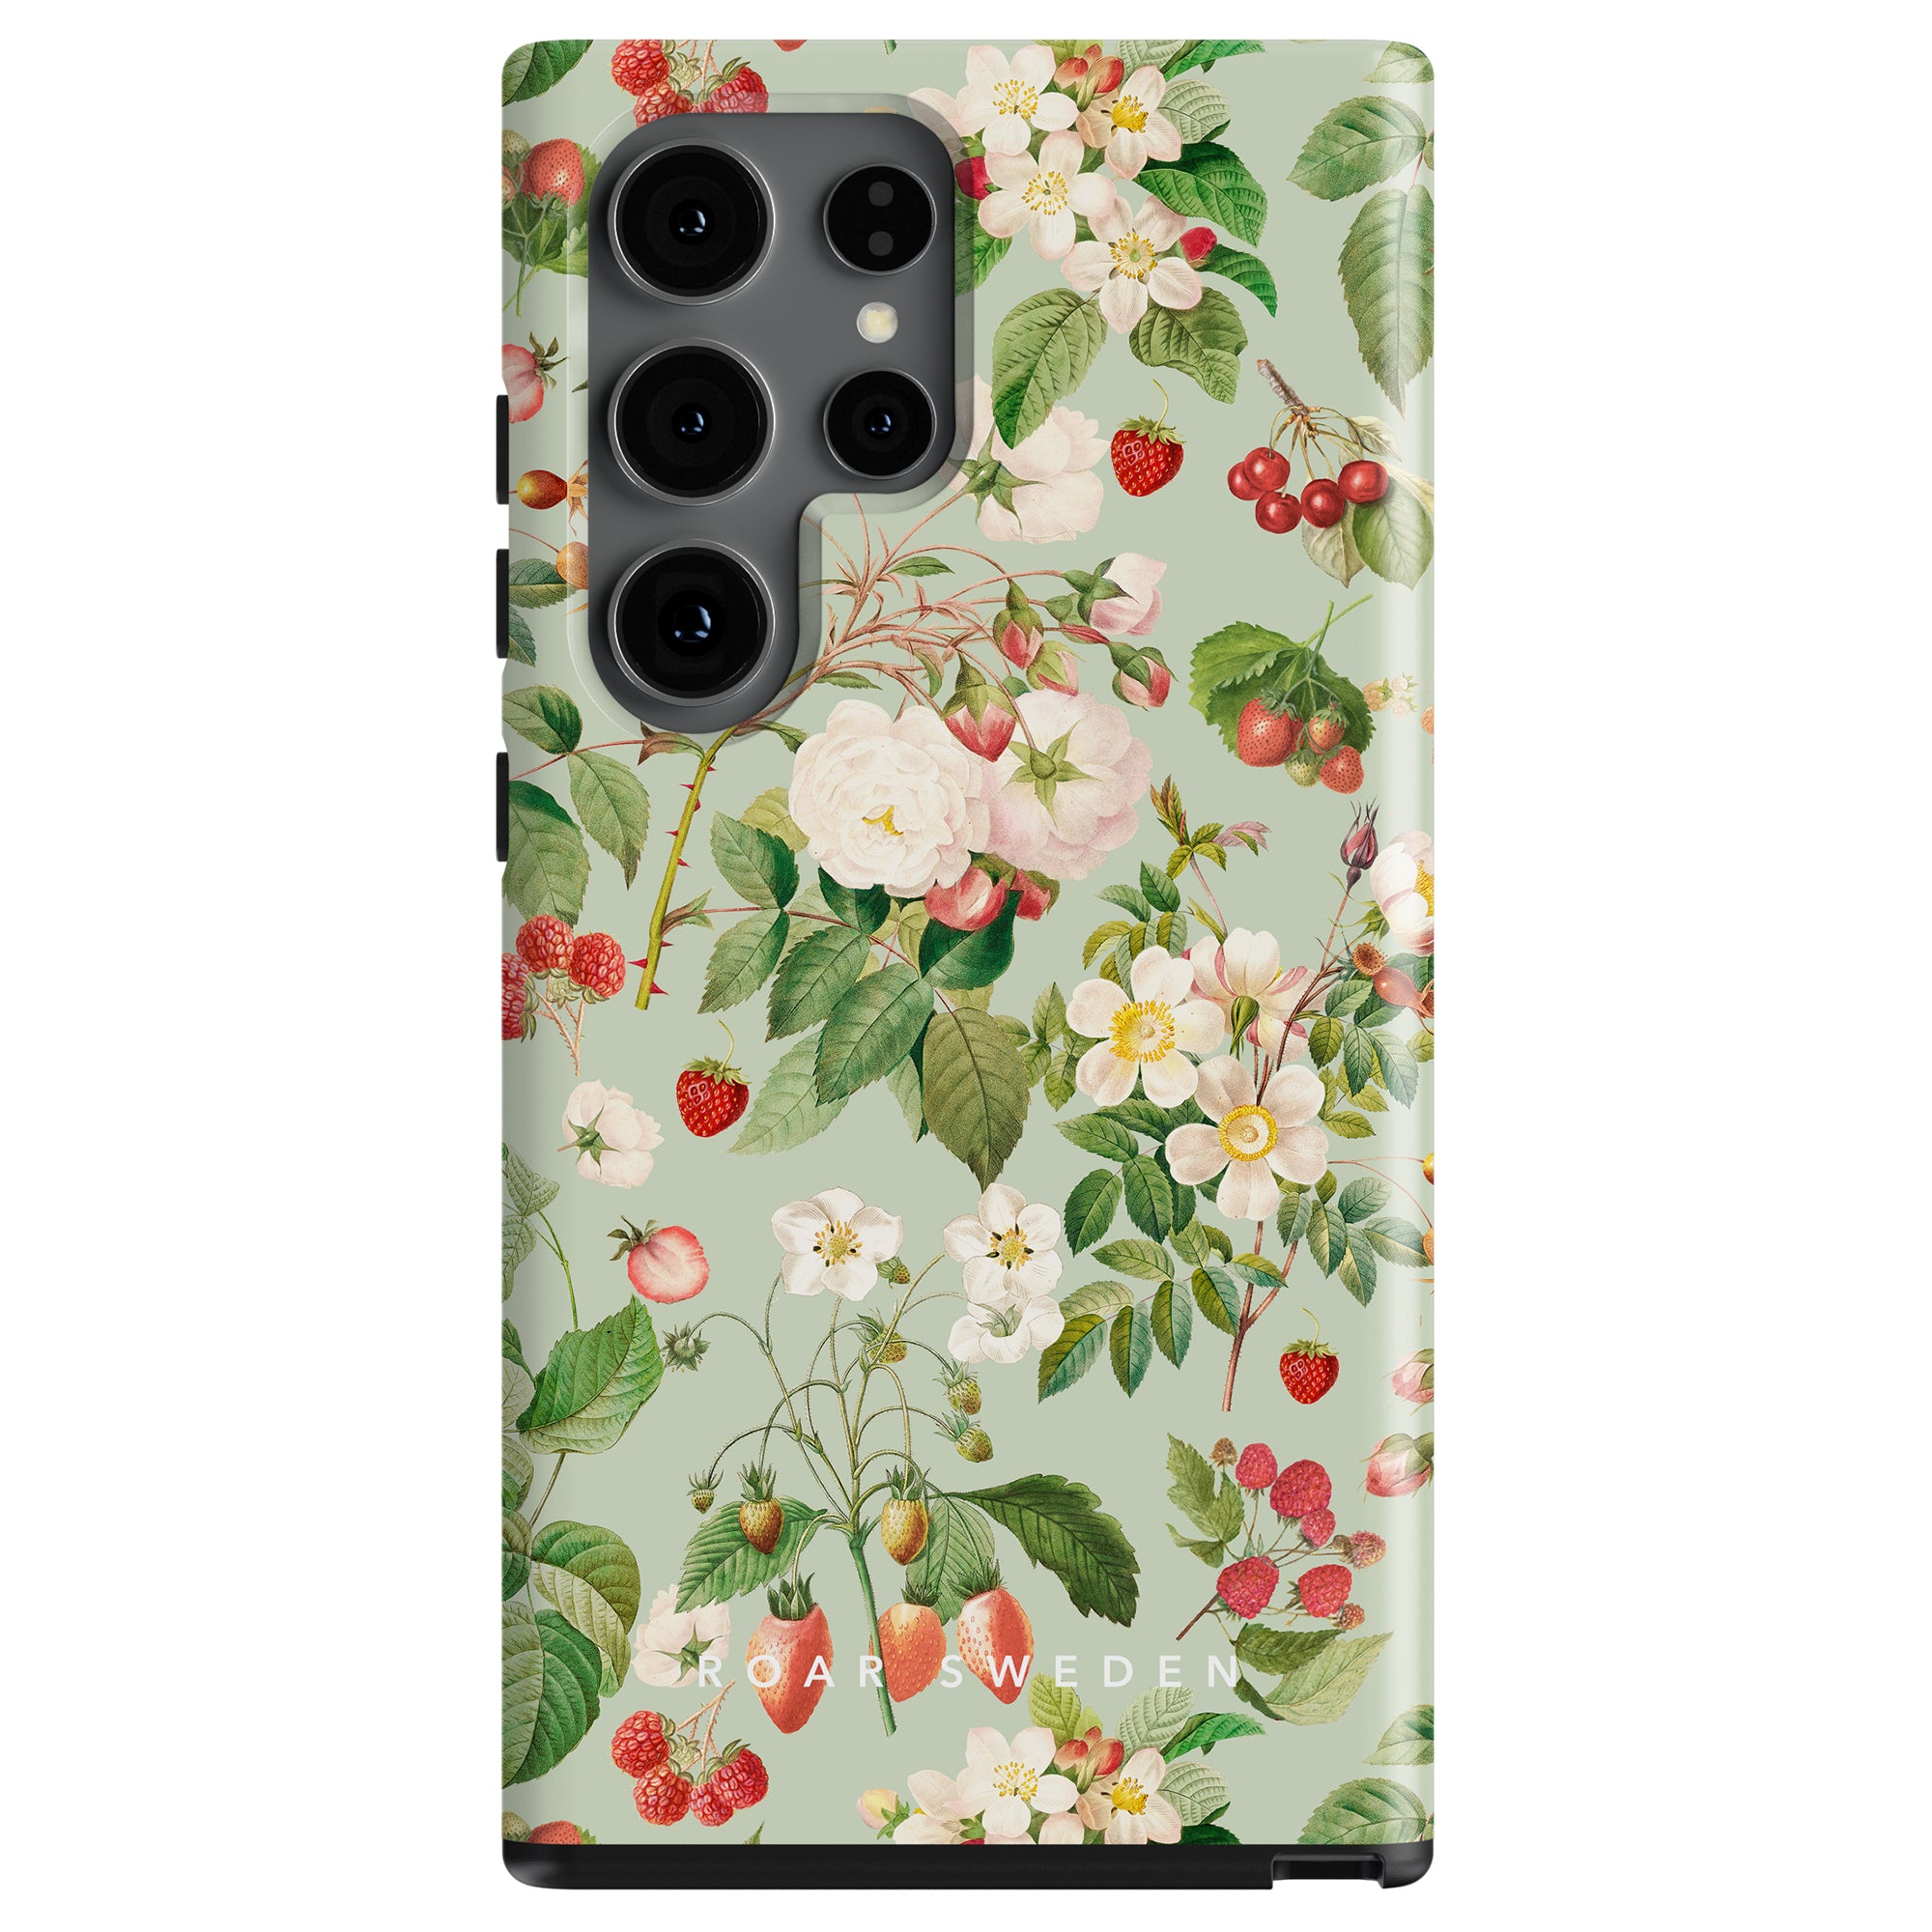 A Tasty Garden - Tough Case with a floral and berry pattern and integrated camera cutouts, made from skyddande material, bearing the text "ideal of sweden".